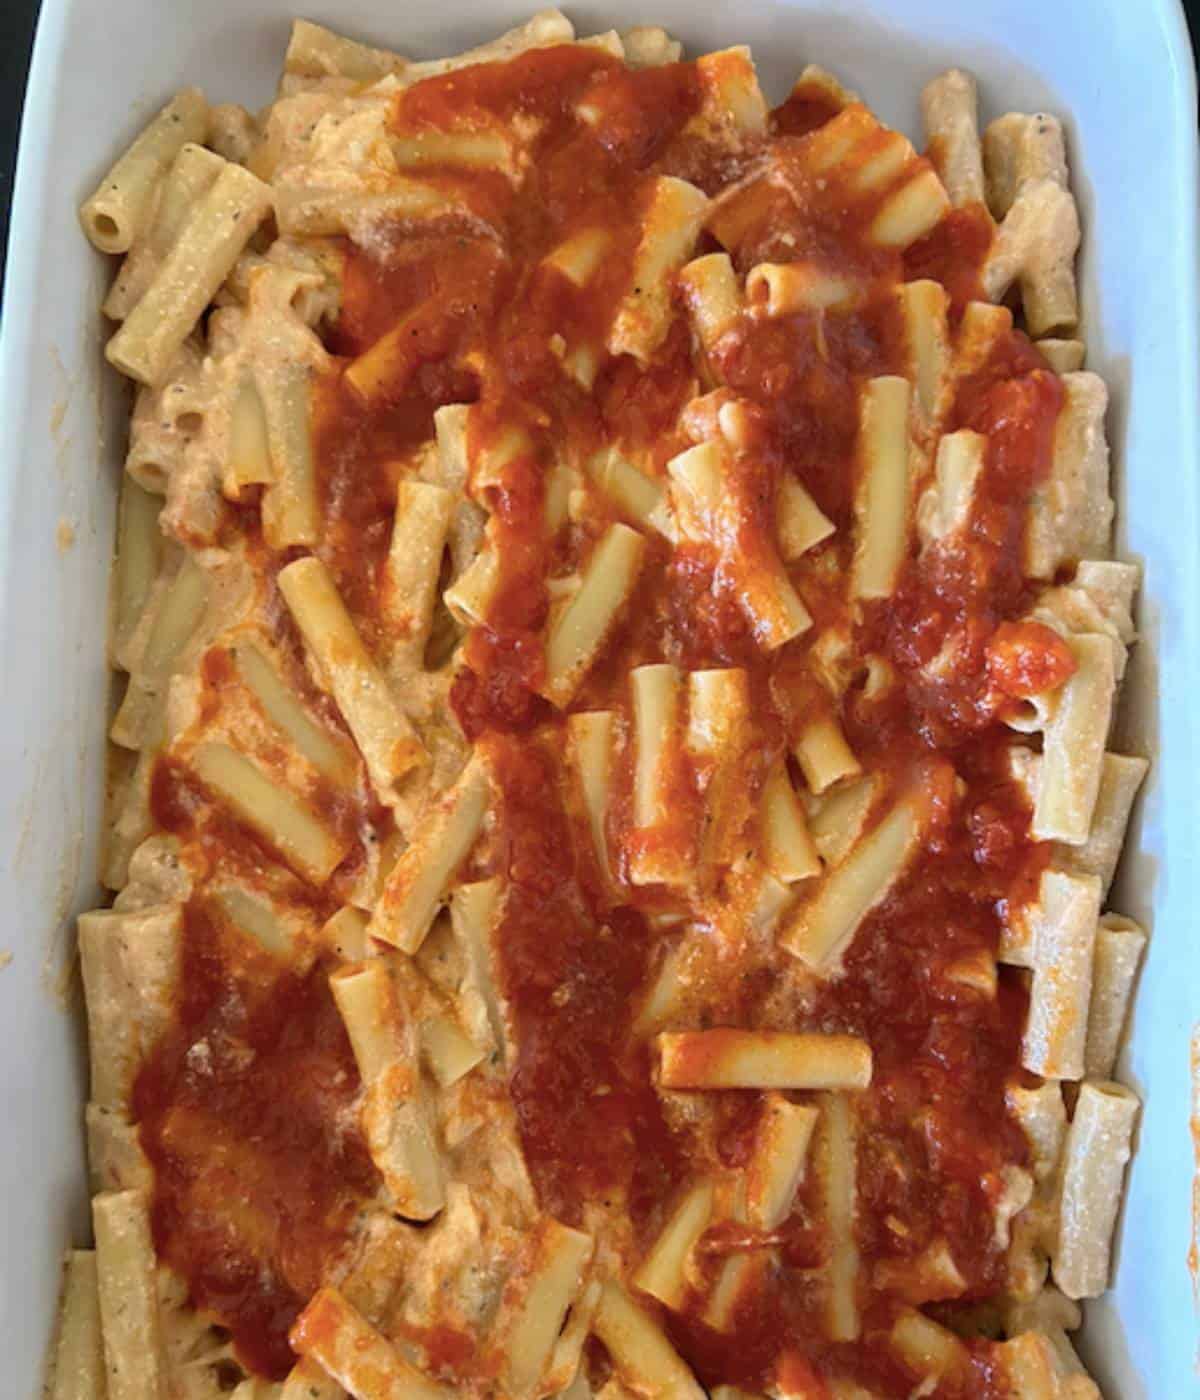 Baked ziti in casserole dish topped with sauce.